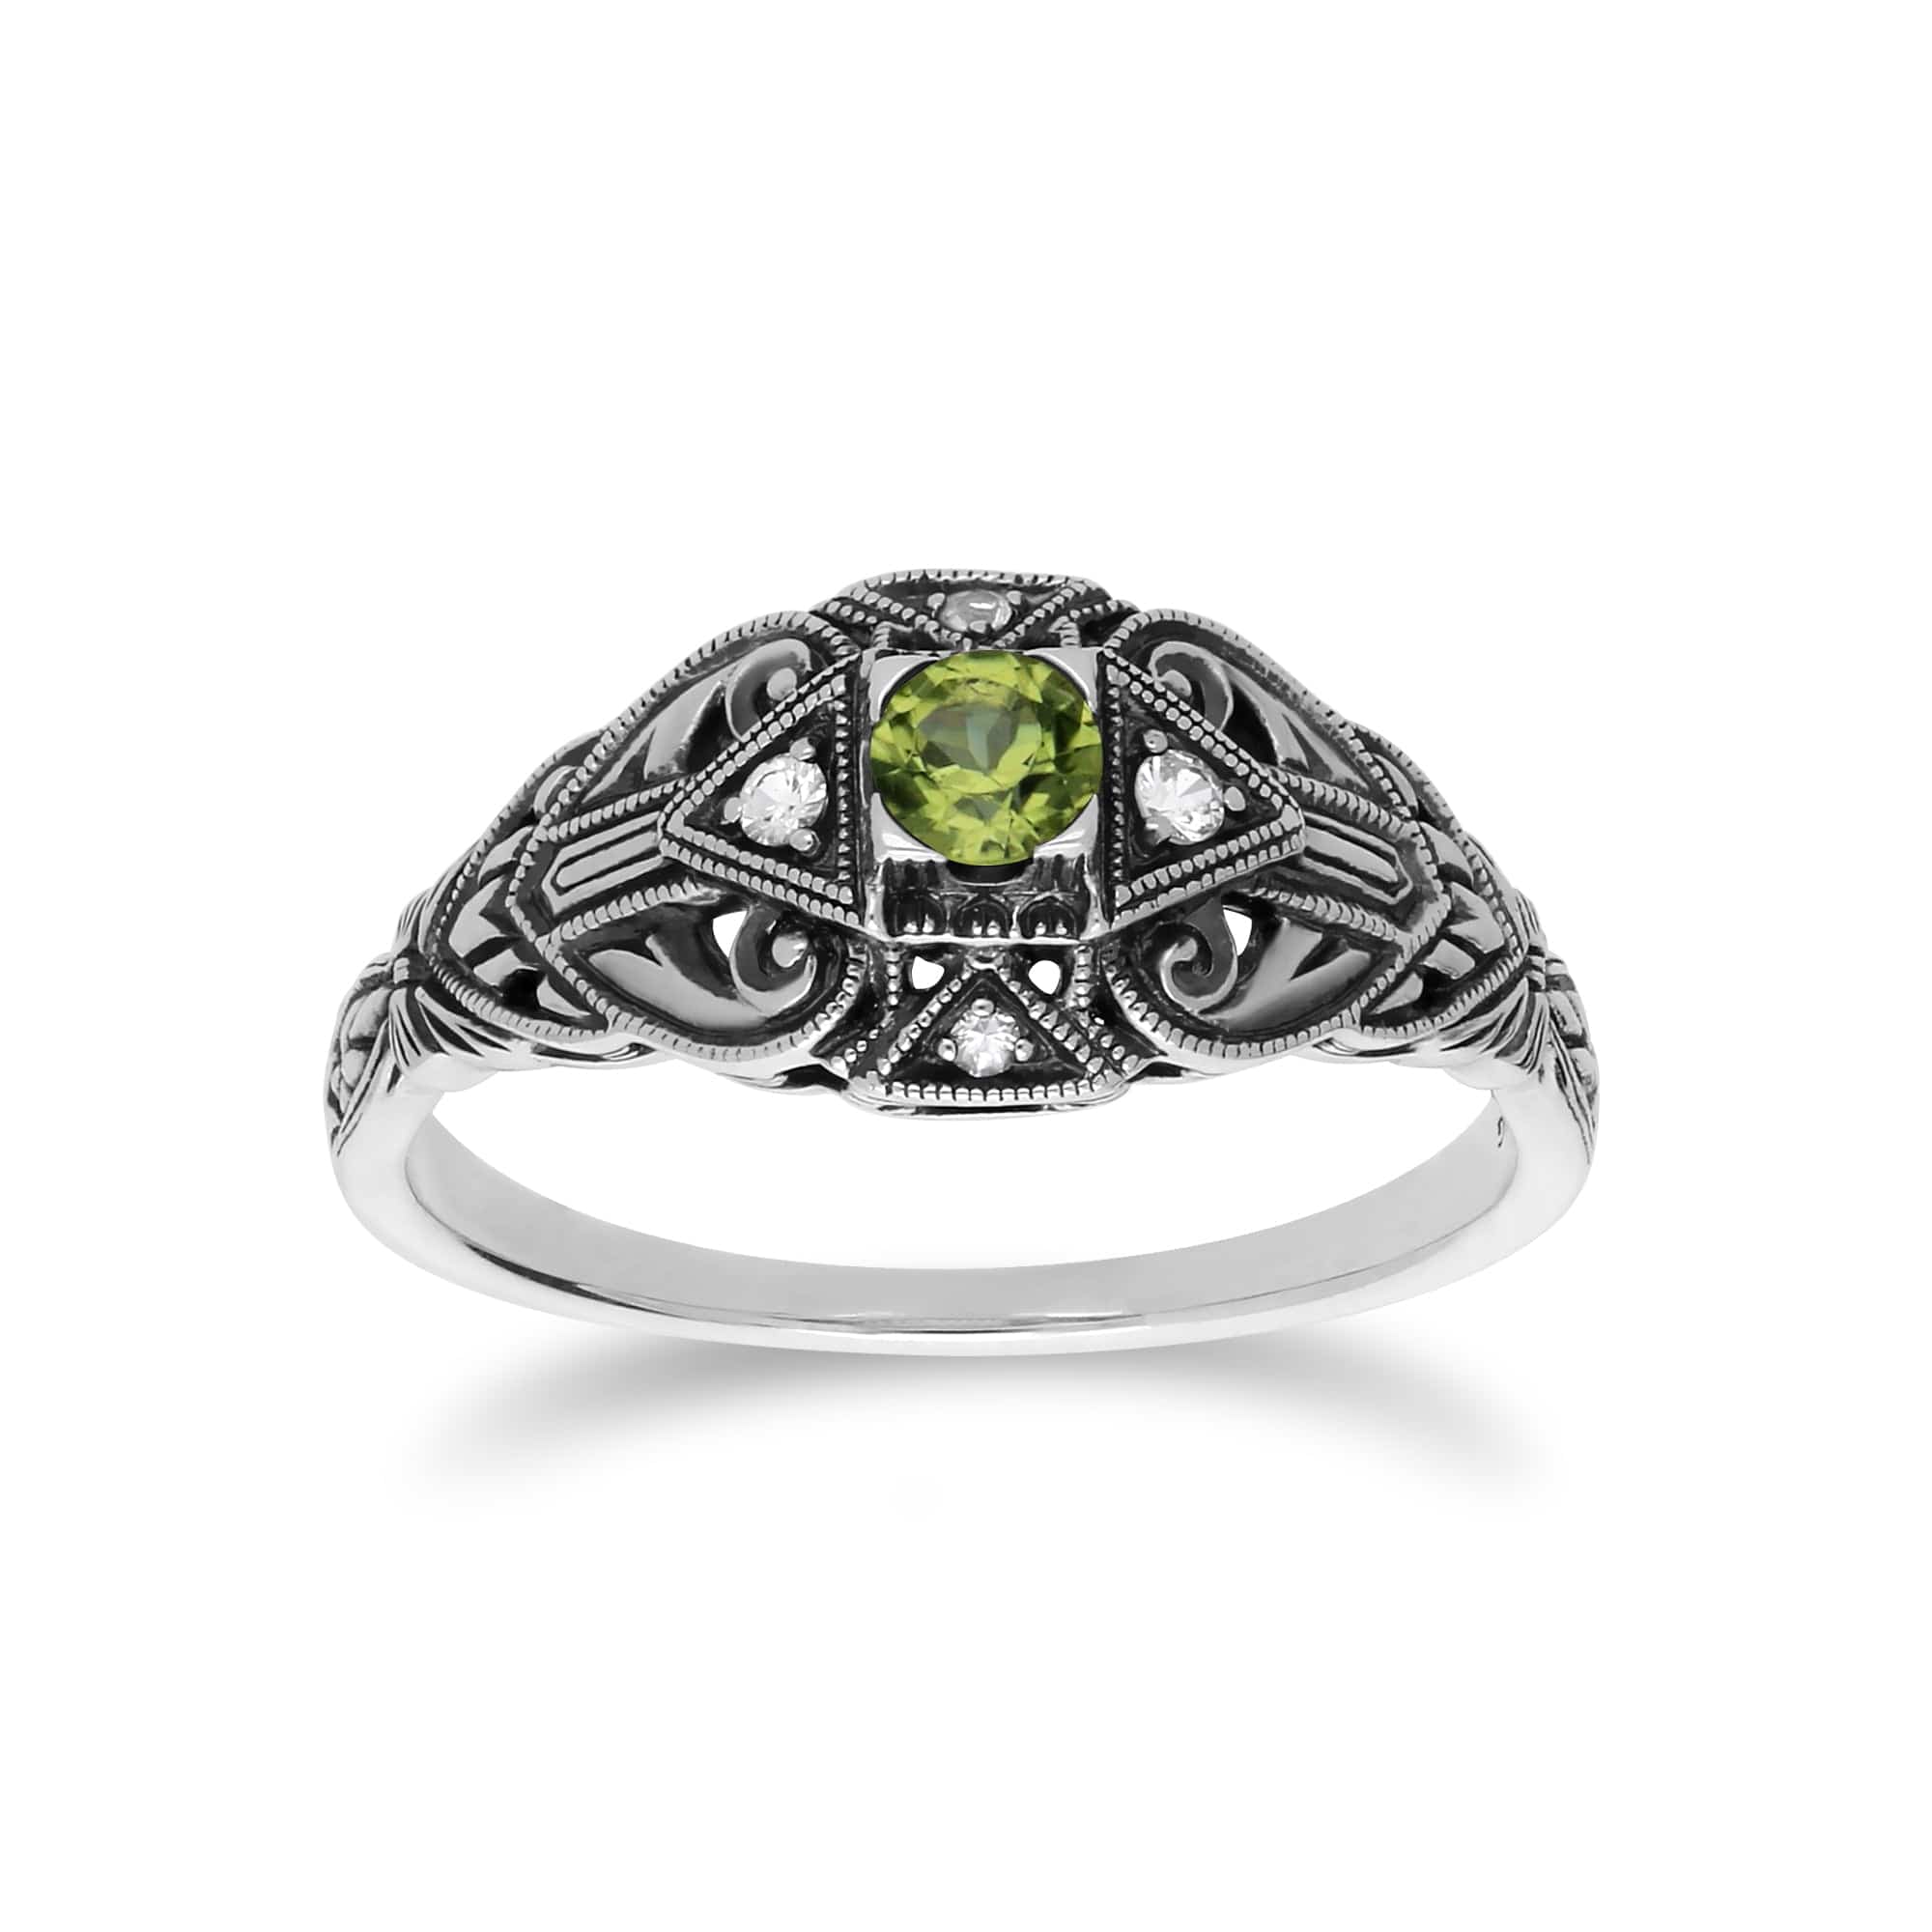 241R210304925 Art Deco Style Round Peridot & White Topaz  Ring in 925 Sterling Silver 1